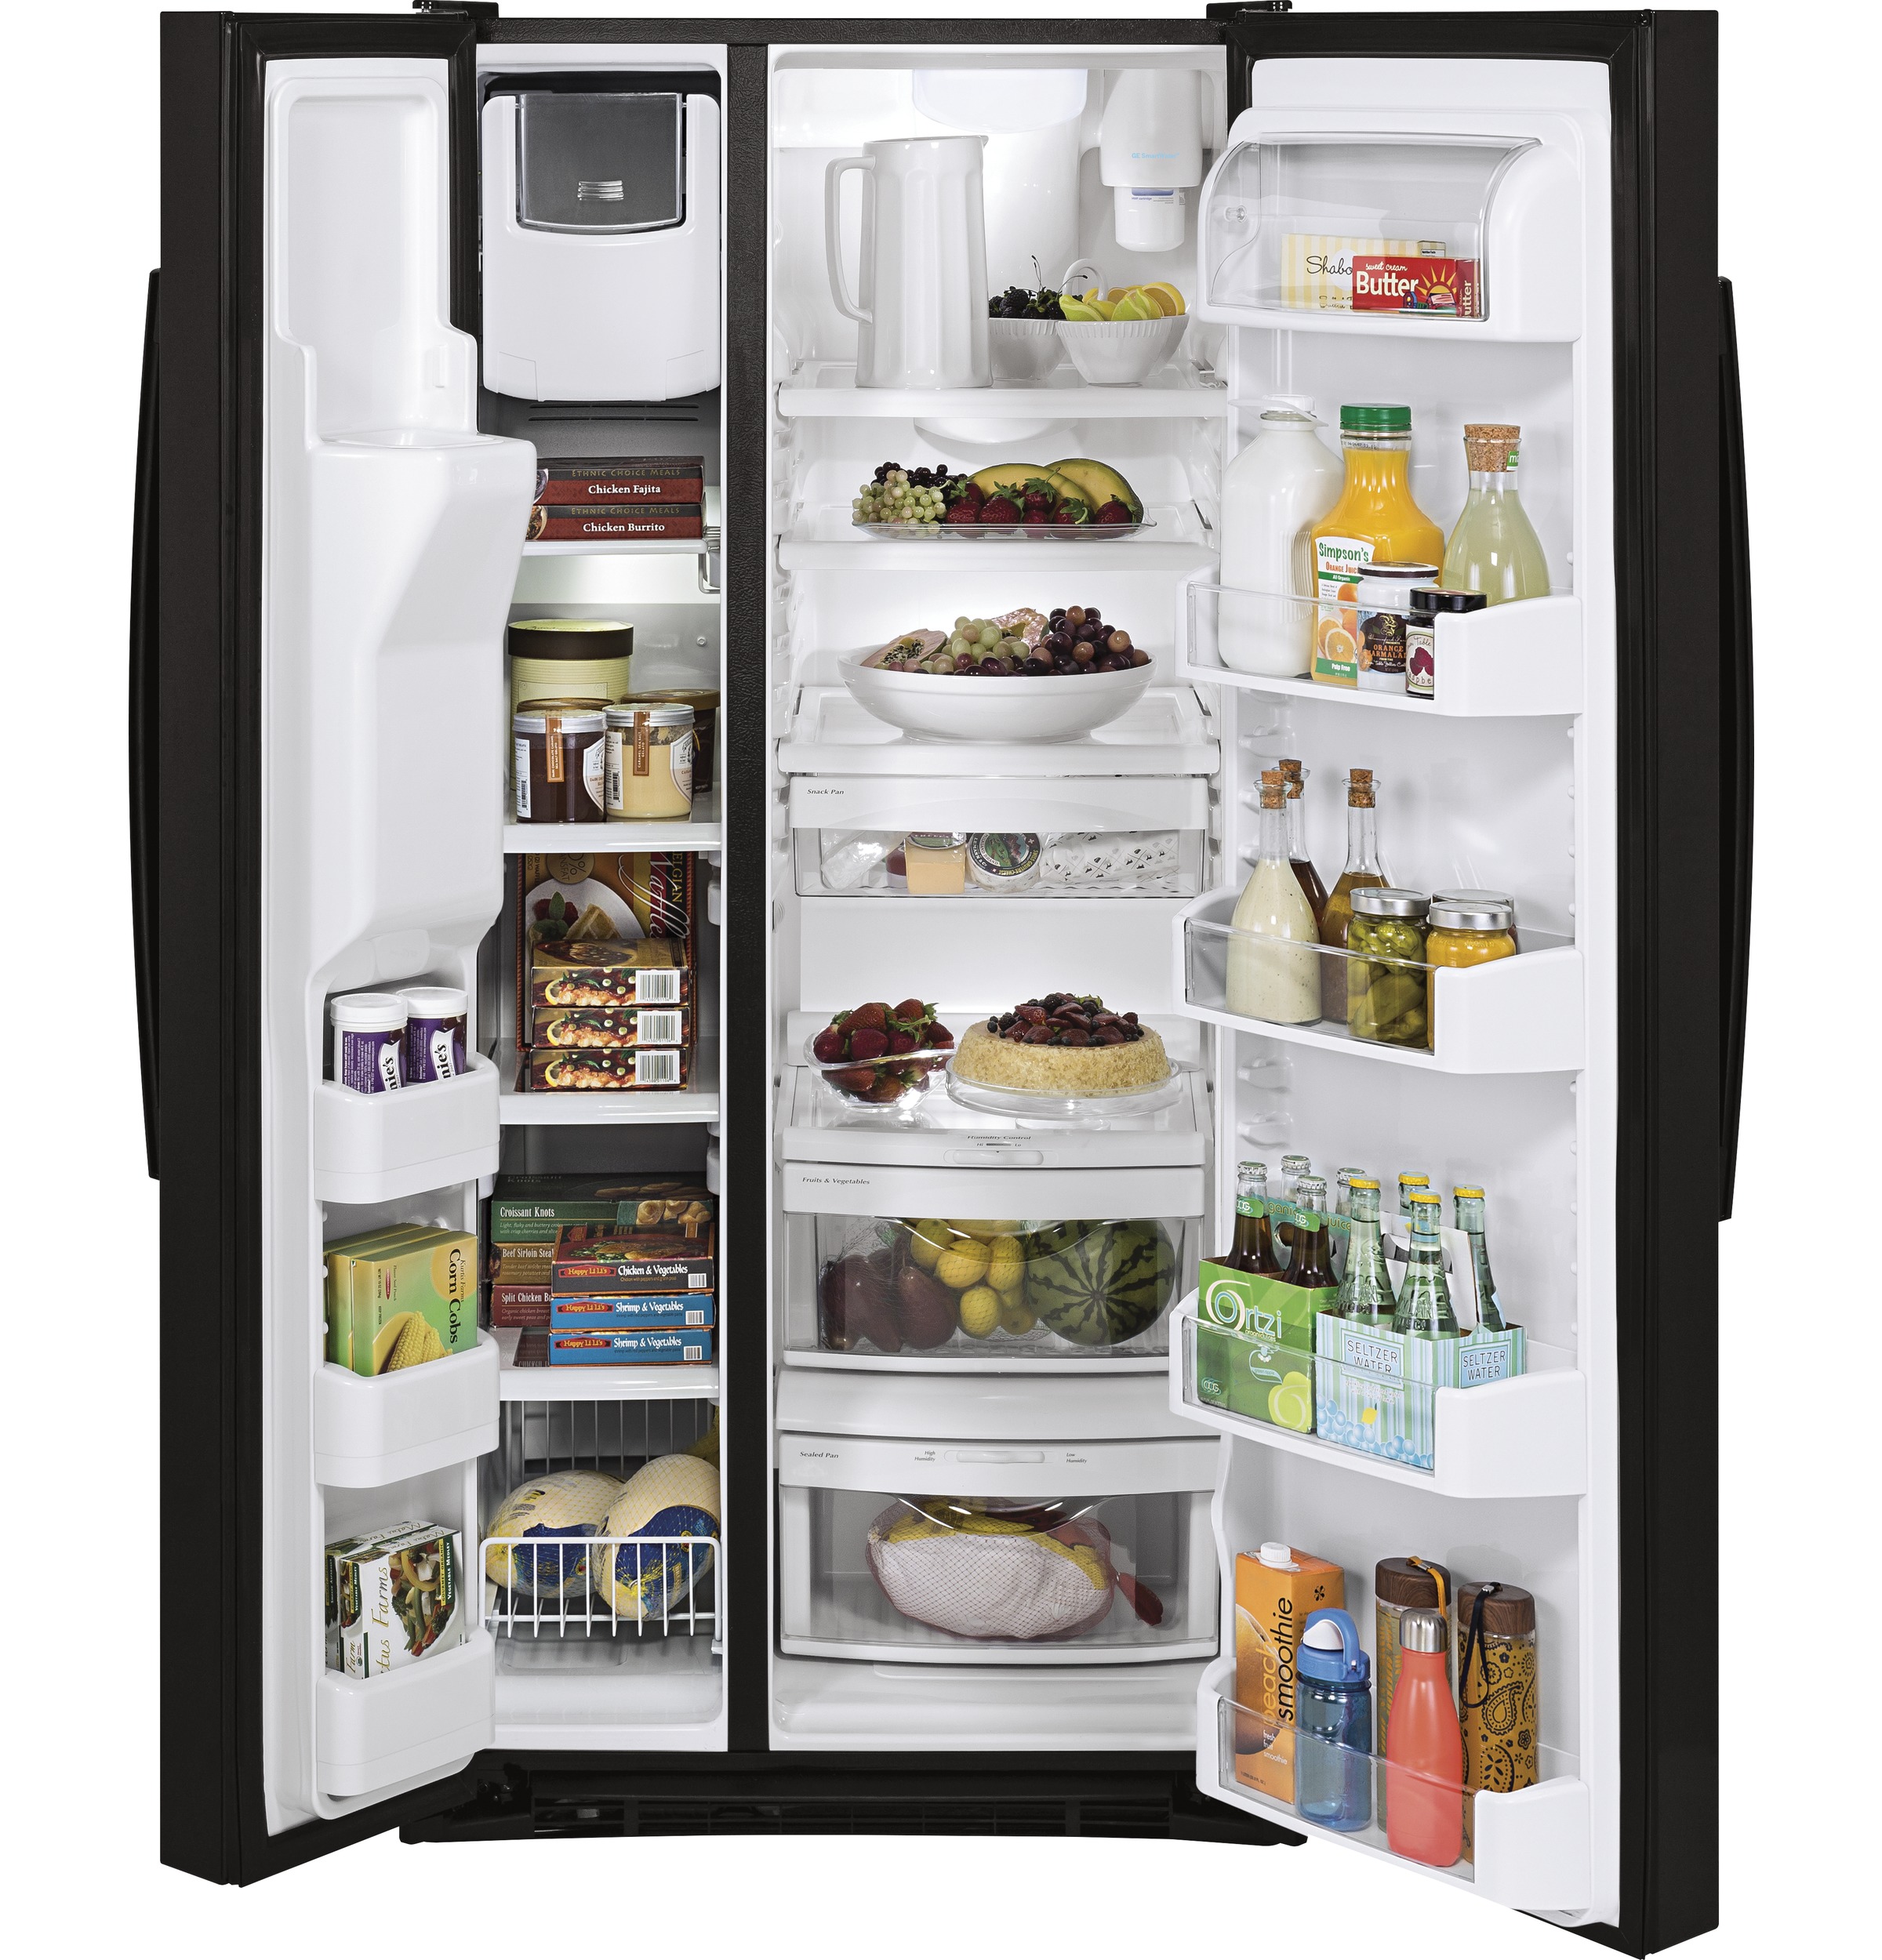 GE 22.5 Cu. Ft. Side-by-Side Refrigerator with Thru-the-Door Ice and ...